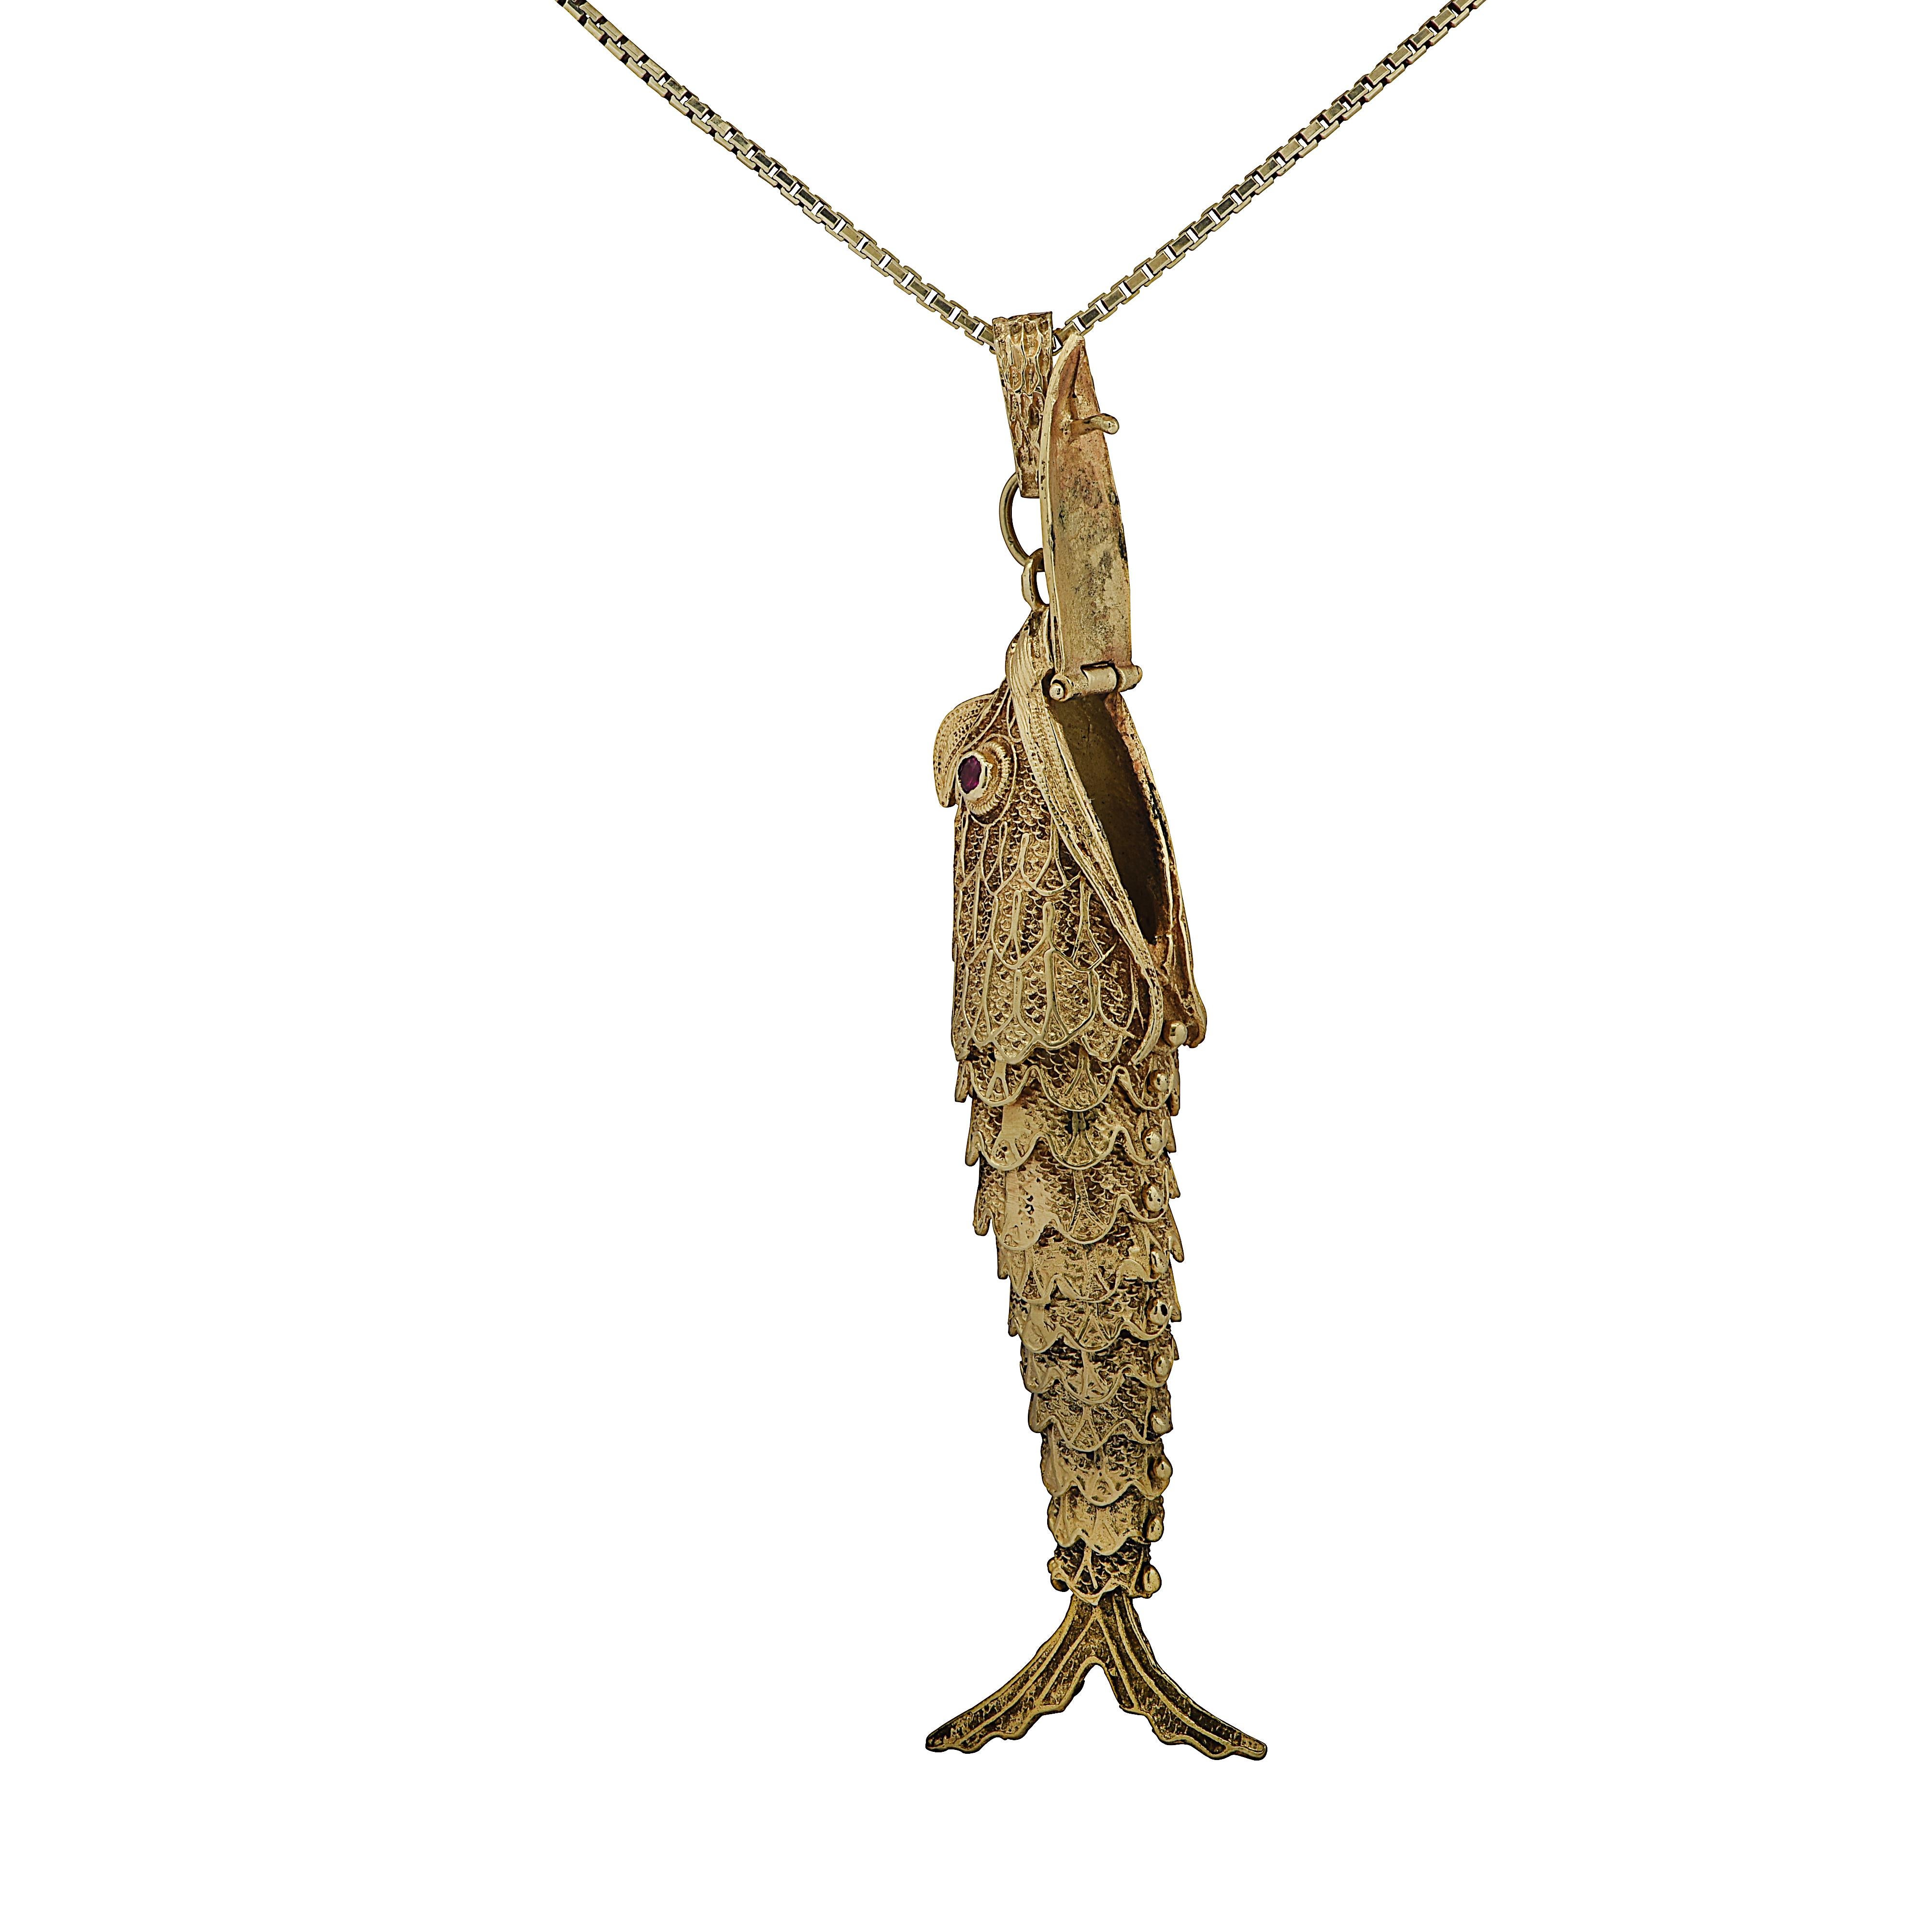 Stunning fish pendant crafted in Italy in yellow gold with two ruby red eyes. The articulated scales enable the fish to wriggle with movement. The hinged mouth opens to reveal a secret storage compartment. This pendant measures 3.5 inches in length